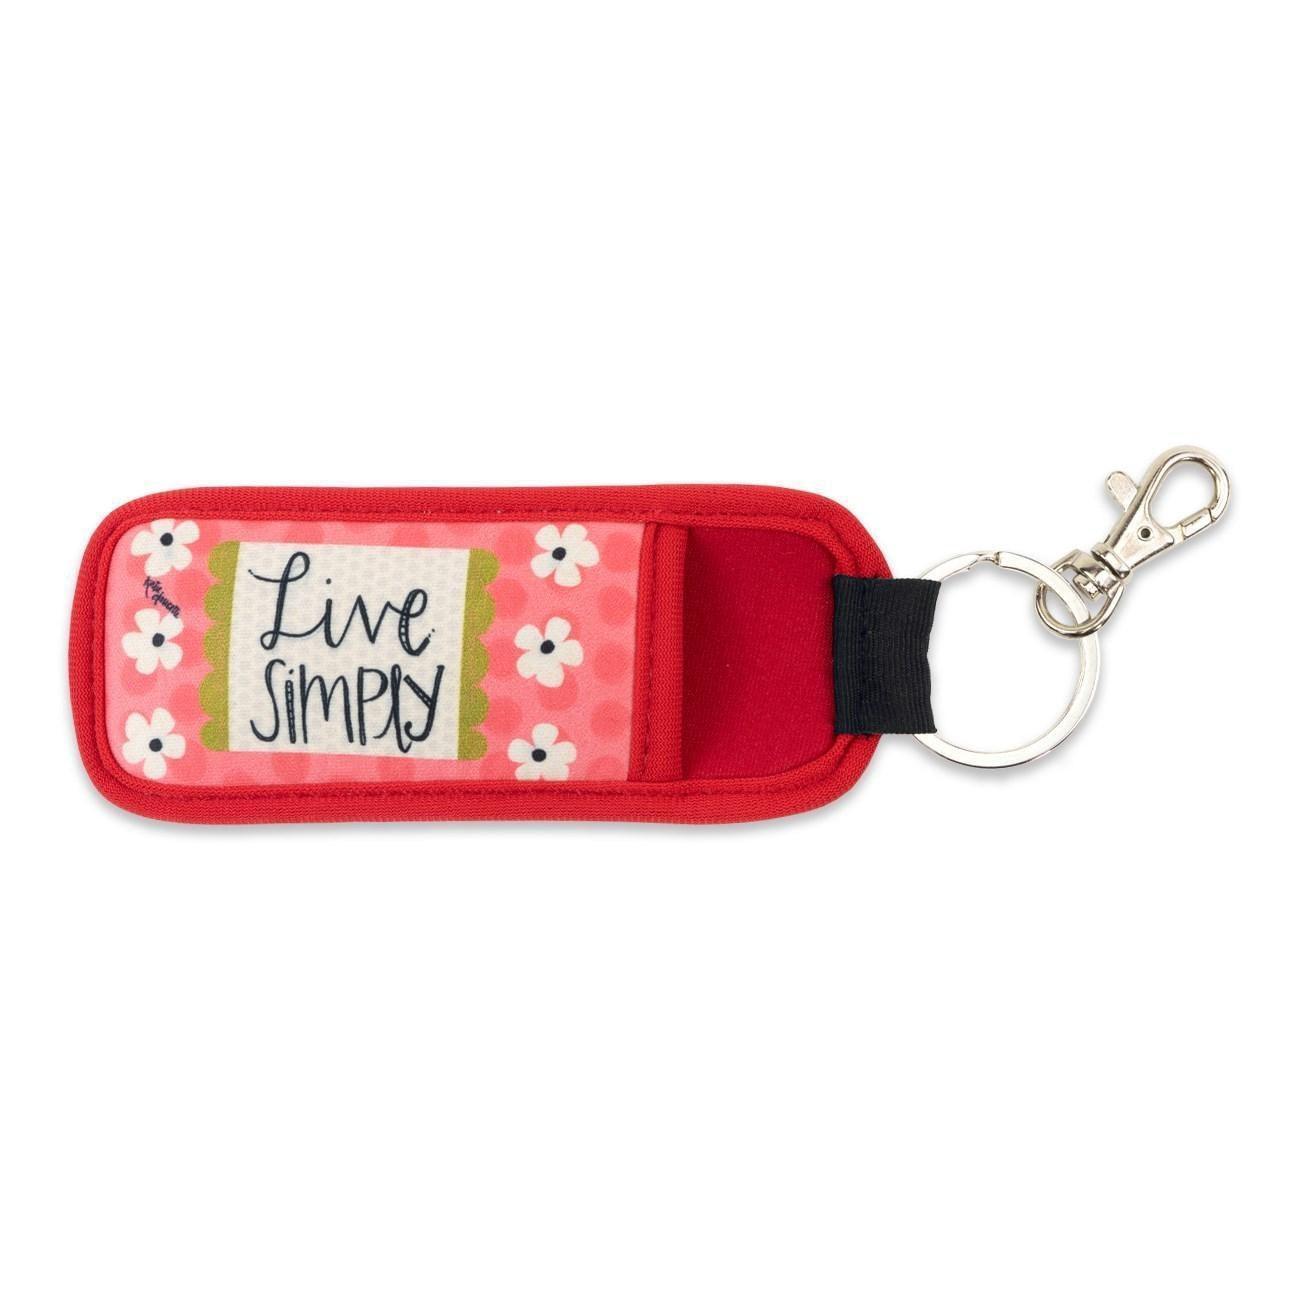 Live Simply Pocket Keychain - Sunshine and Grace Gifts